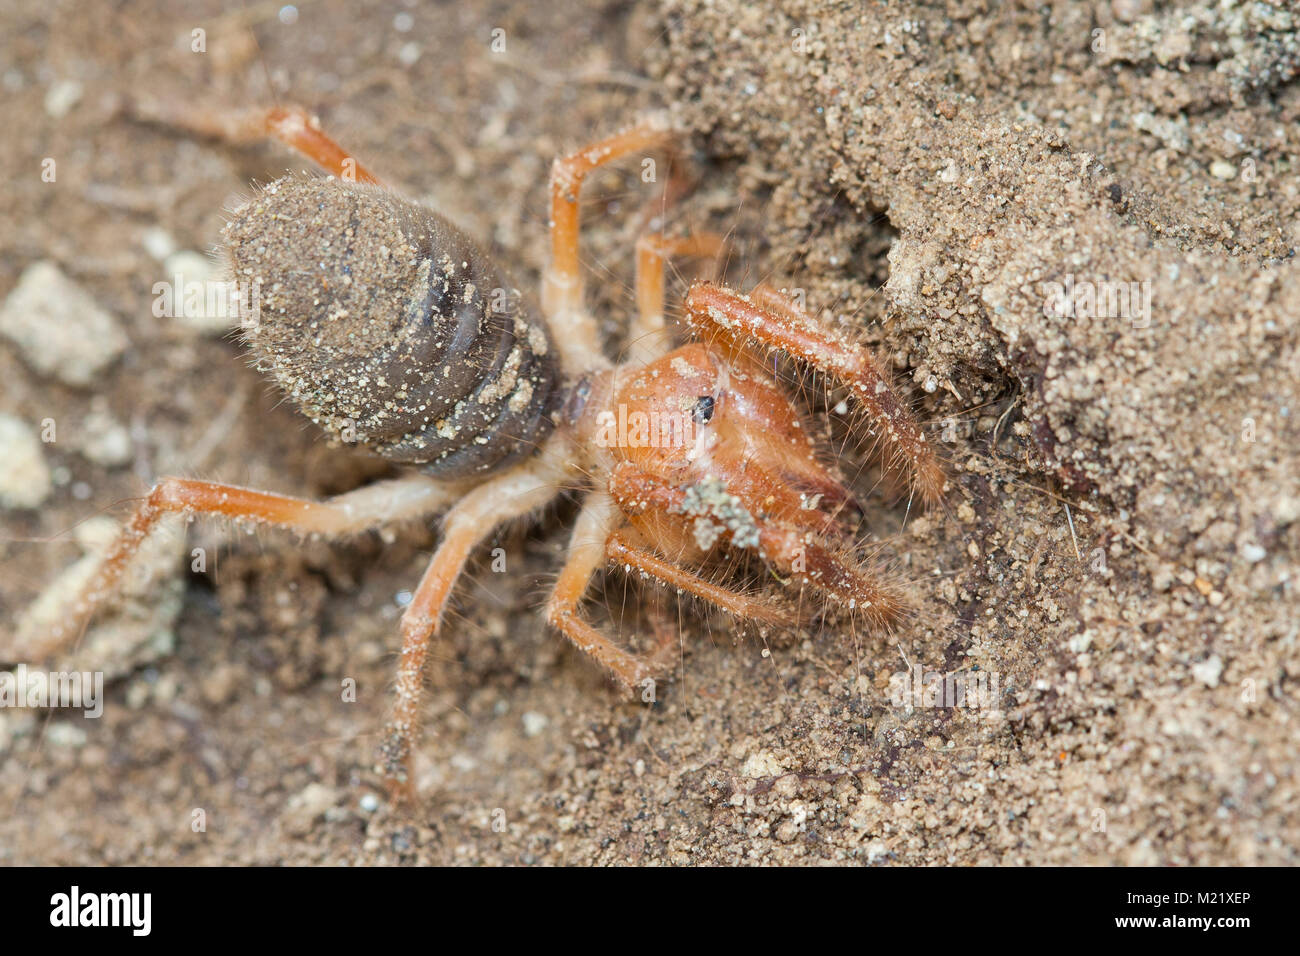 Solifugae is an order of animals in the class Arachnida known variously as camel spiders, wind scorpions, sun spiders, or solifuges. Macro portrait Stock Photo